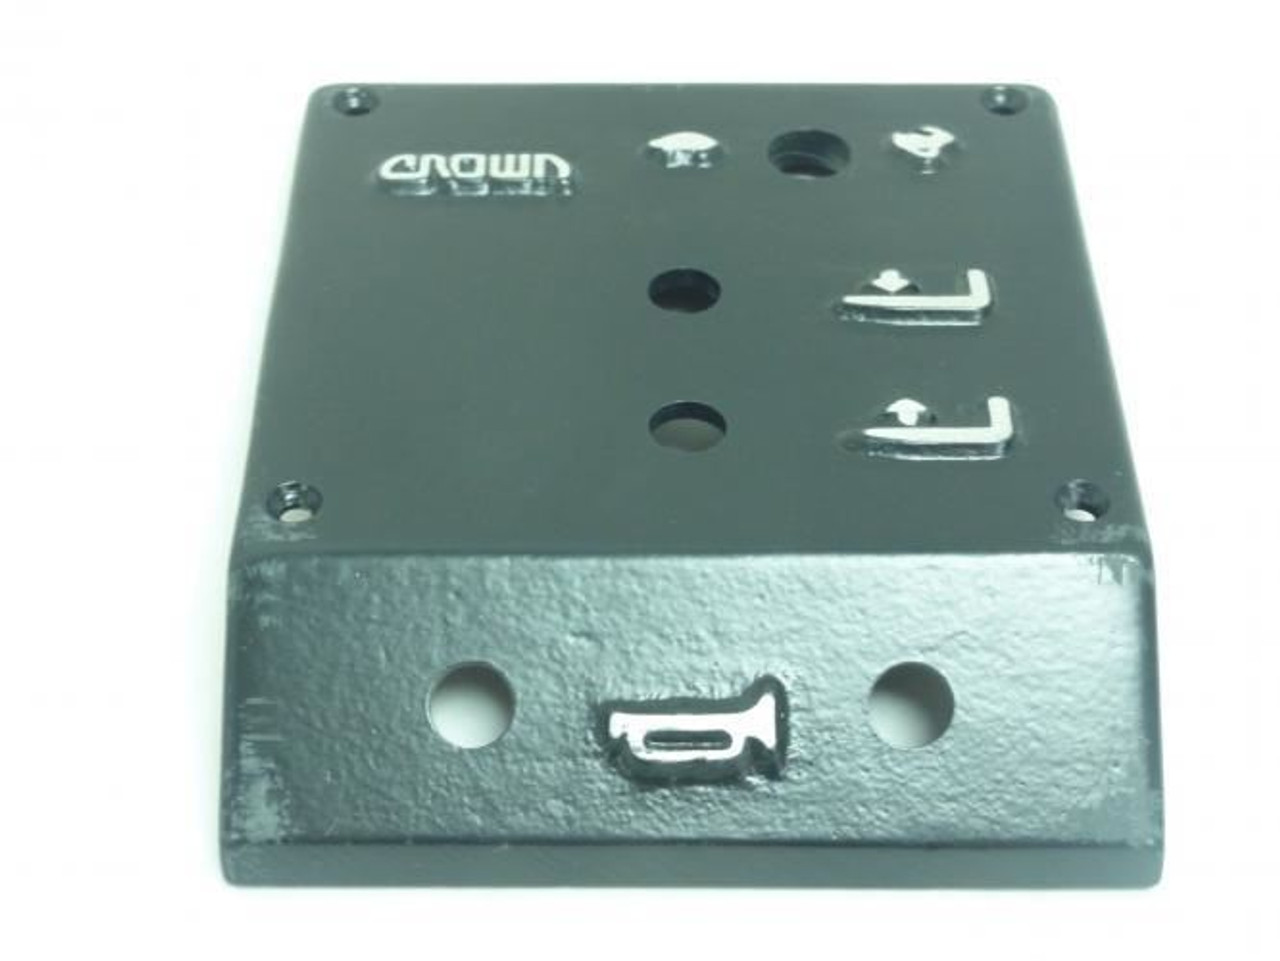 Crown 92870-1; Machined Control Plate/Cover